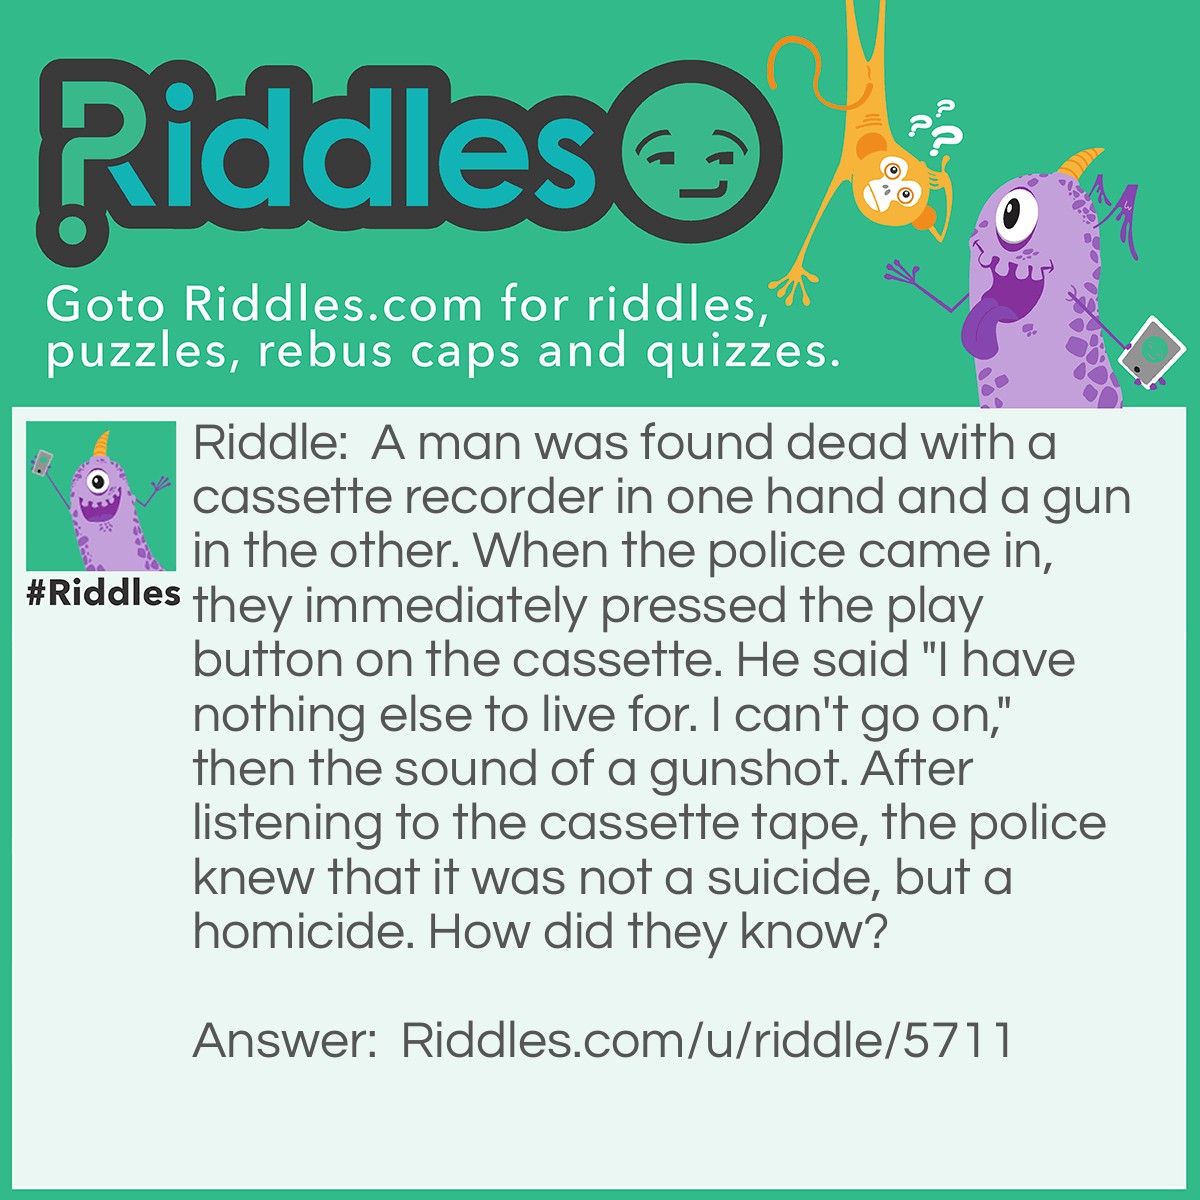 Riddle: A man was found dead with a cassette recorder in one hand and a gun in the other. When the police came in, they immediately pressed the play button on the cassette. He said "I have nothing else to live for. I can't go on," then the sound of a gunshot. After listening to the cassette tape, the police knew that it was not a suicide, but a homicide. How did they know? Answer: If the man shot himself while he was recording, how did he rewind the cassette tape?